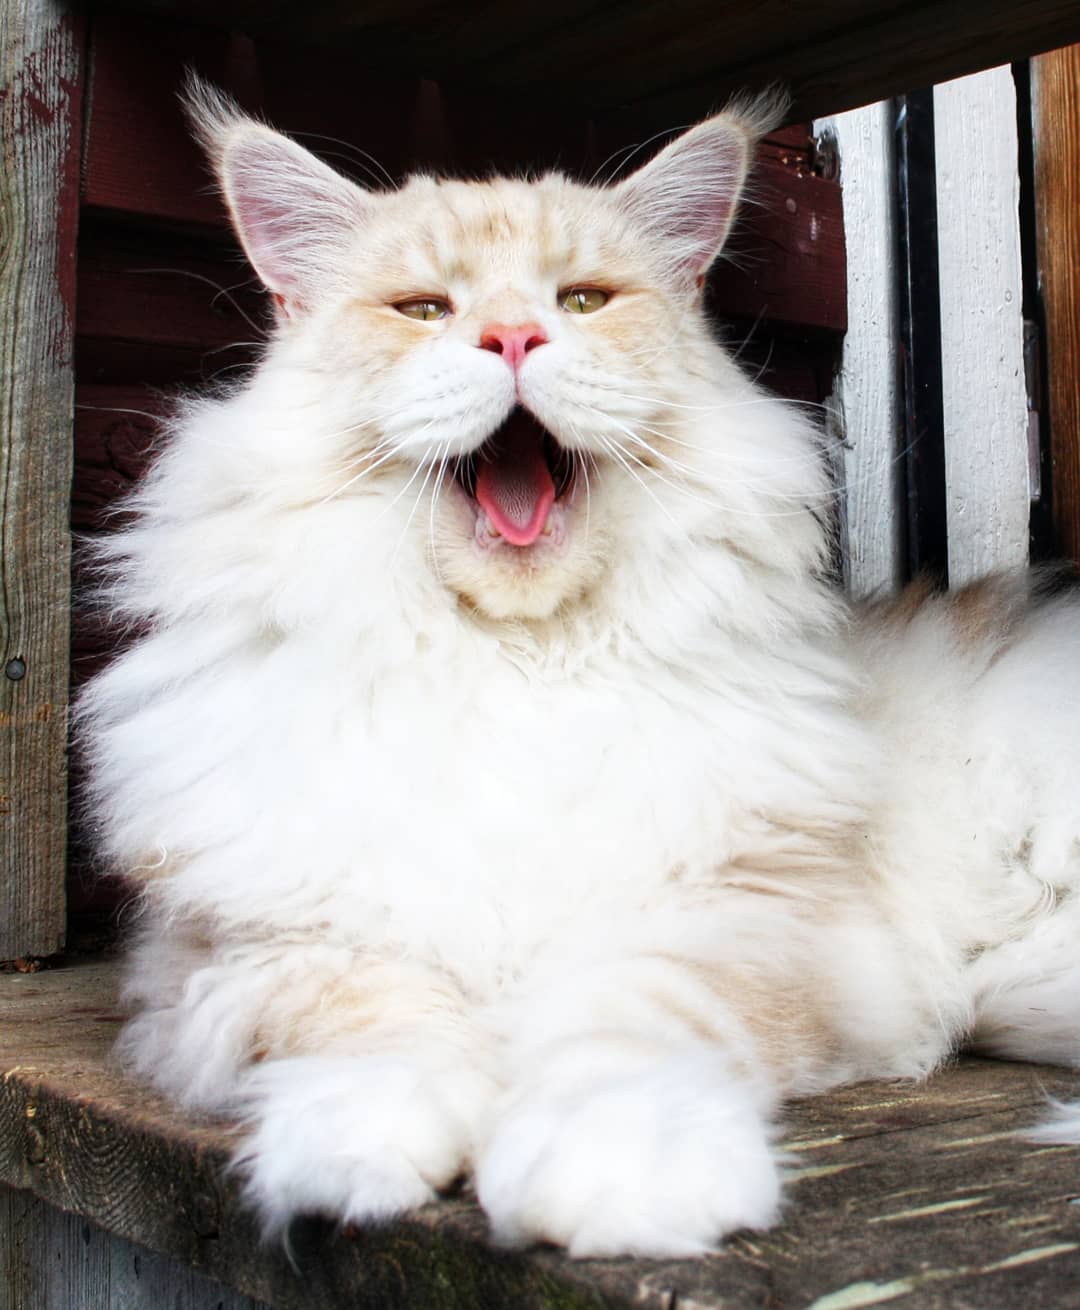 Meet Lotus, The Huge Fluffy Maine Coon Cat That's Going Viral On